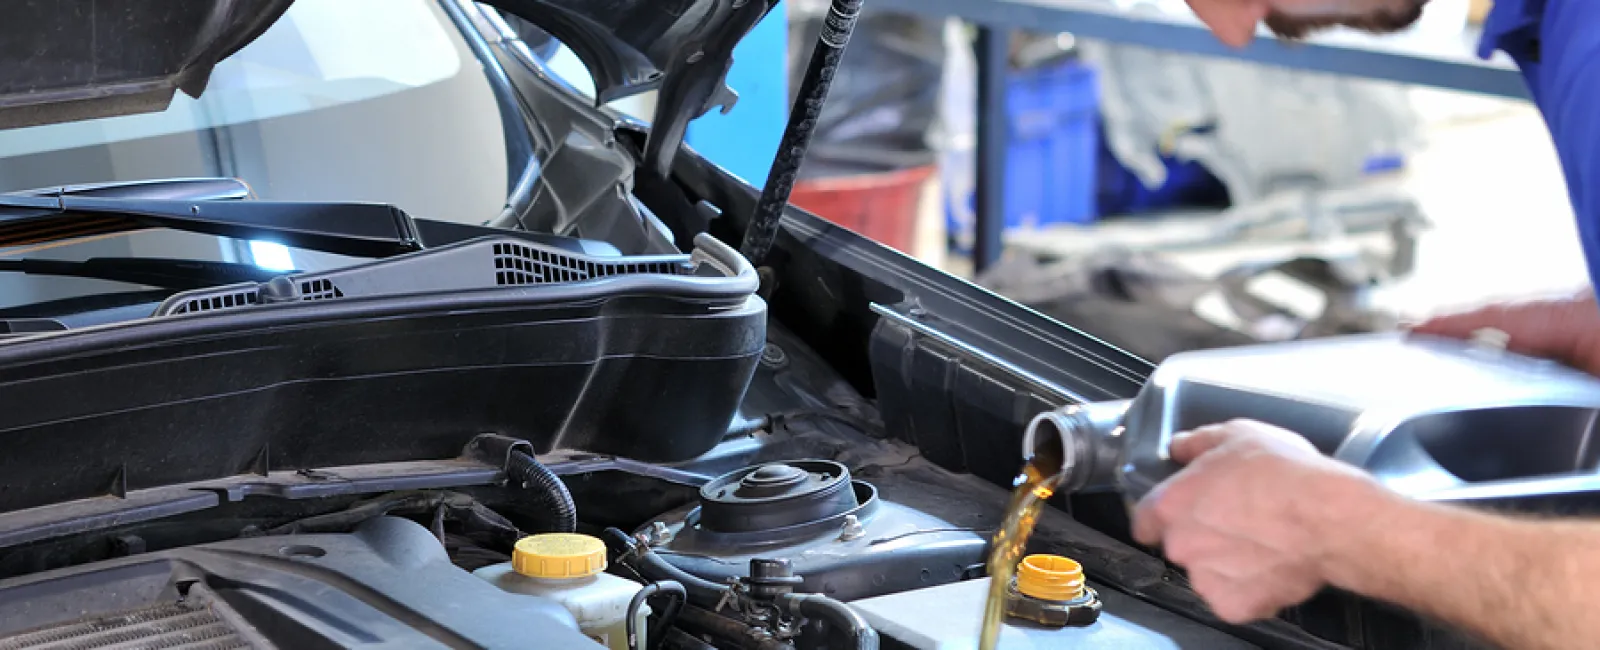 What Is a 15 Point Inspection Oil Change?